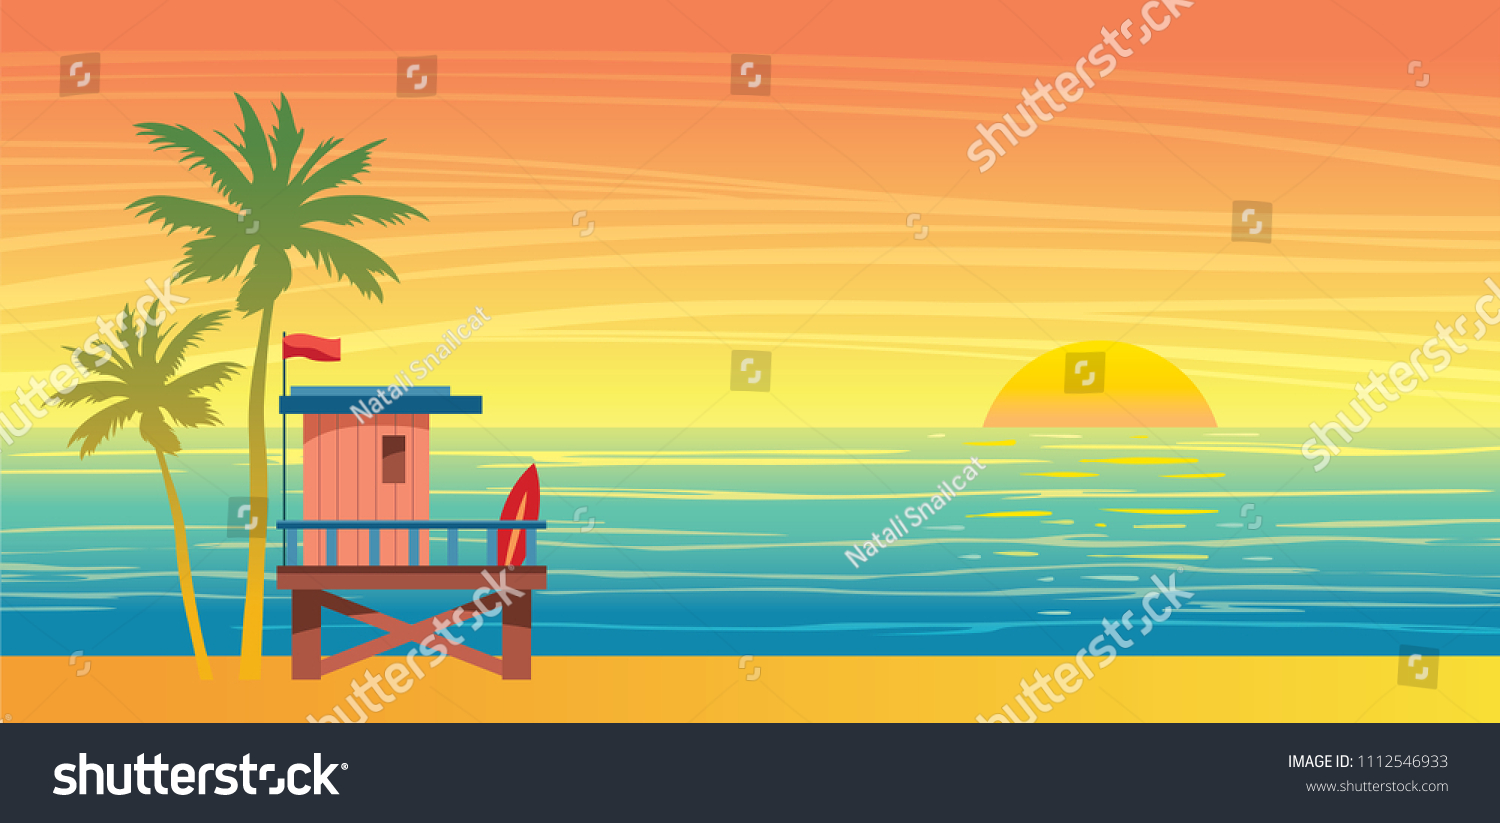 SVG of Nature landscape with lifeguard station, palm tree and blue sea on a sunset sky. Vector summer illustration. svg